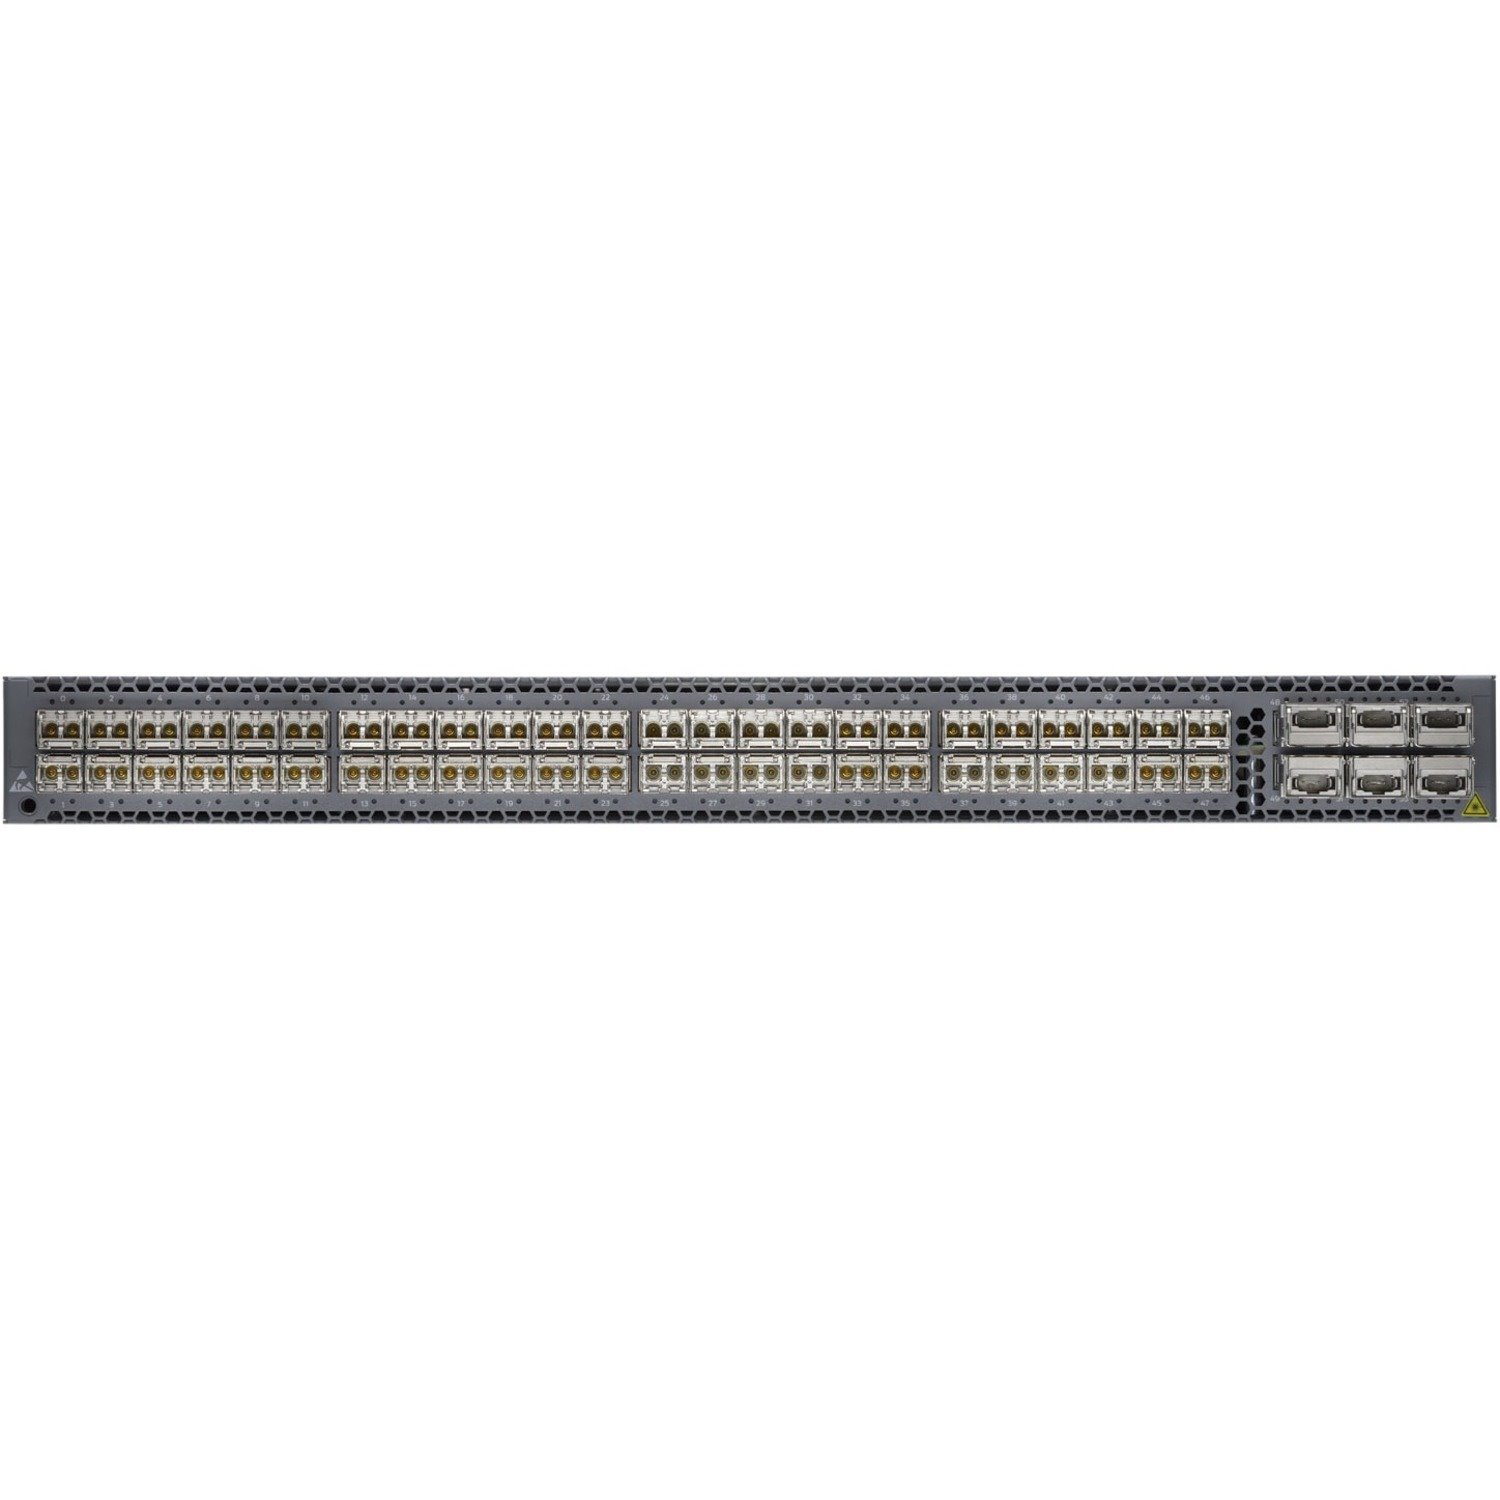 Juniper QFX5100 QFX5100-48S-AFO Manageable Layer 3 Switch